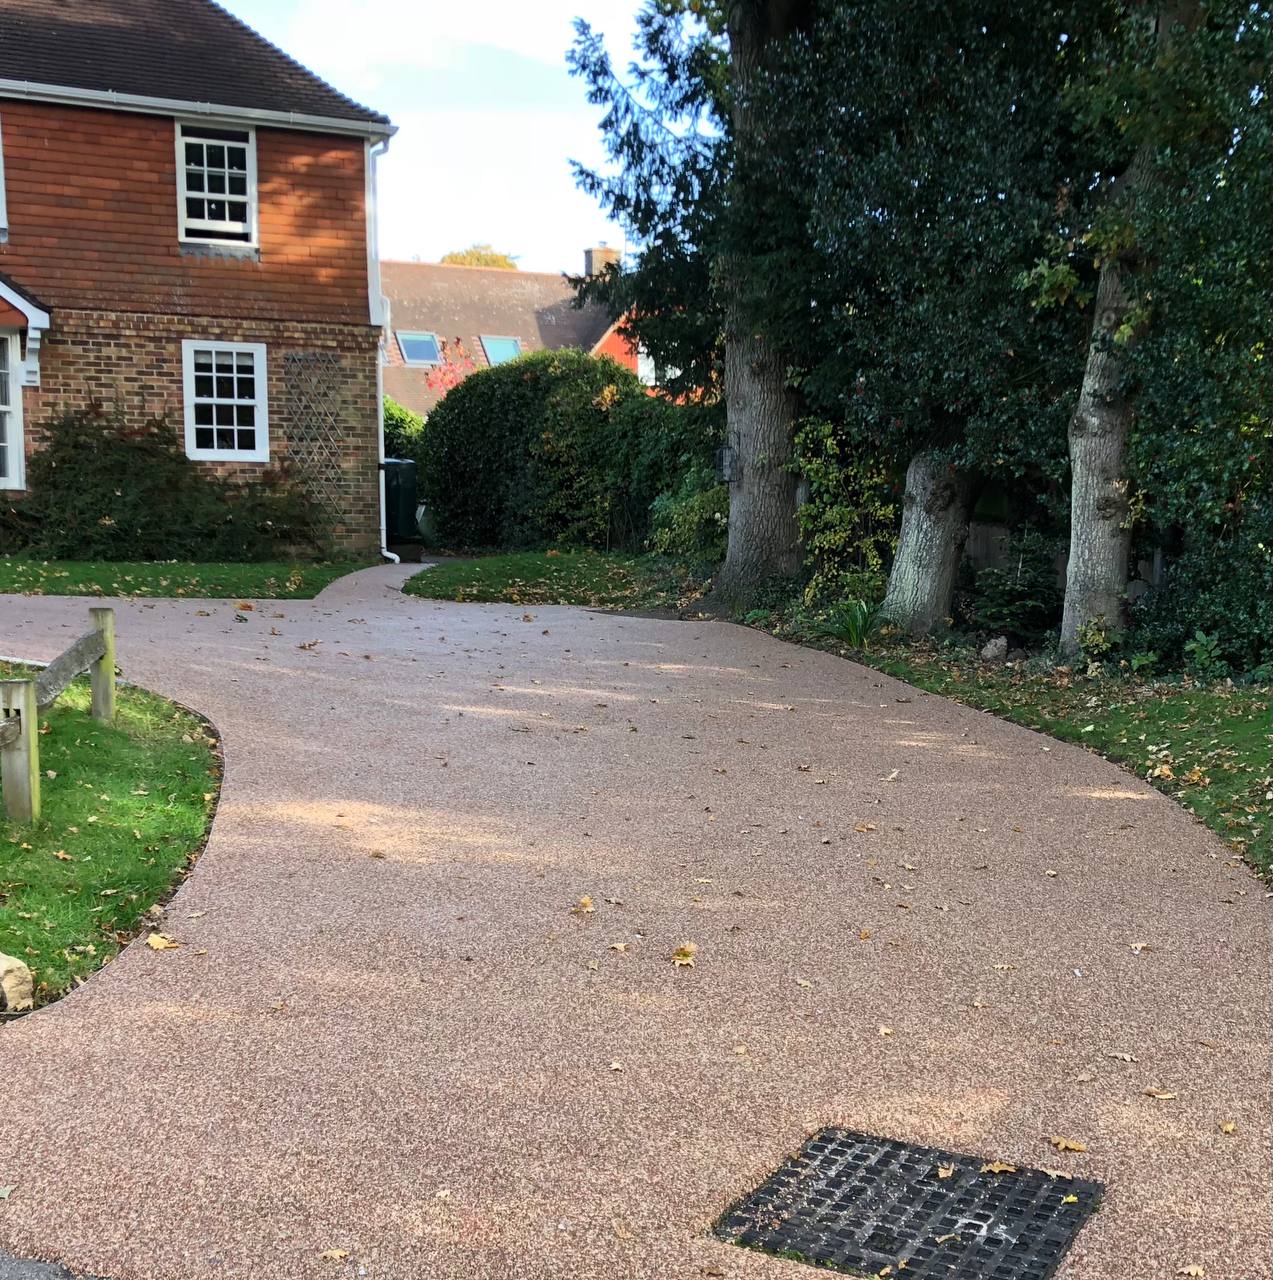 This is a photo of a Resin bound driveway carried out in a district of Darlington. All works done by Resin Driveways Darlington